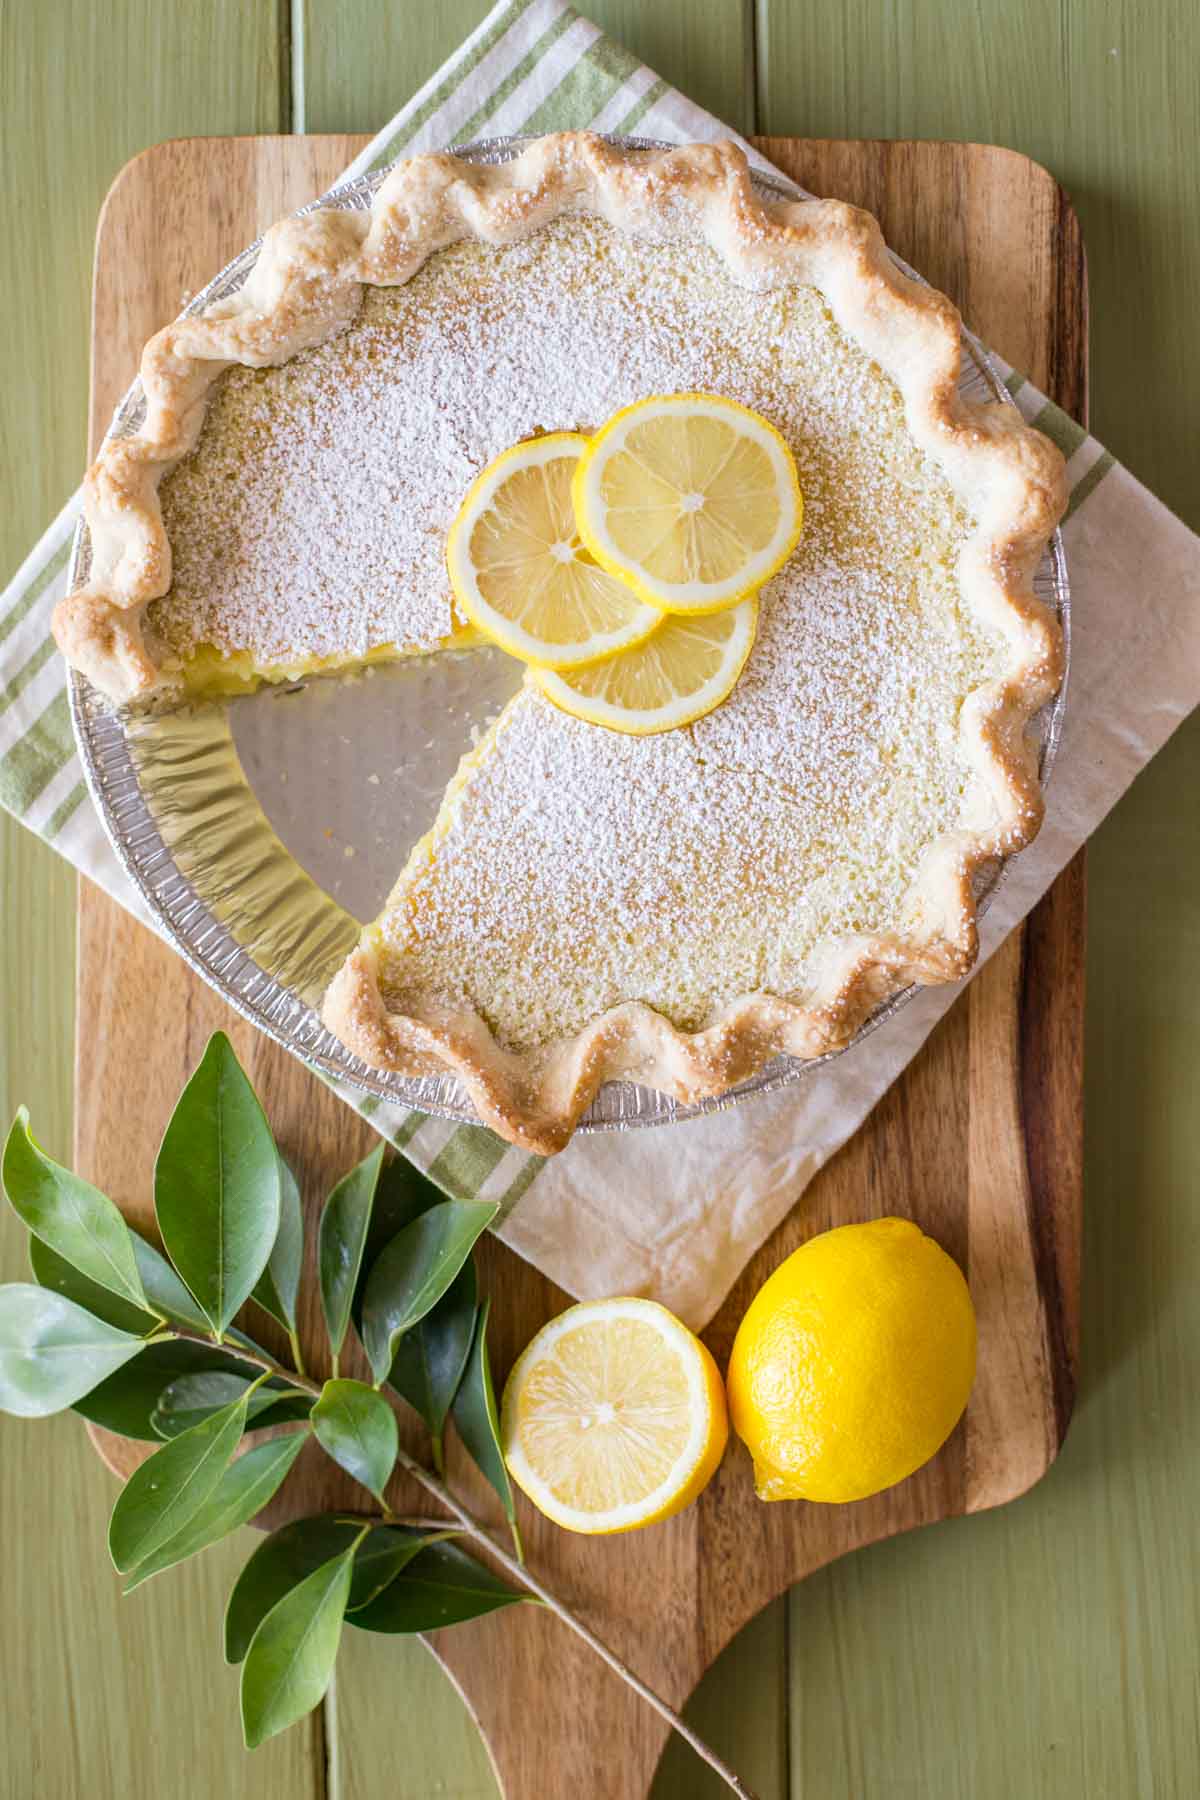 A Whole Lemon Pie dusted with powdered sugar and garnished with lemon slices, with one slice of pie missing, sitting on a cutting board with some lemons and tree leaves. 